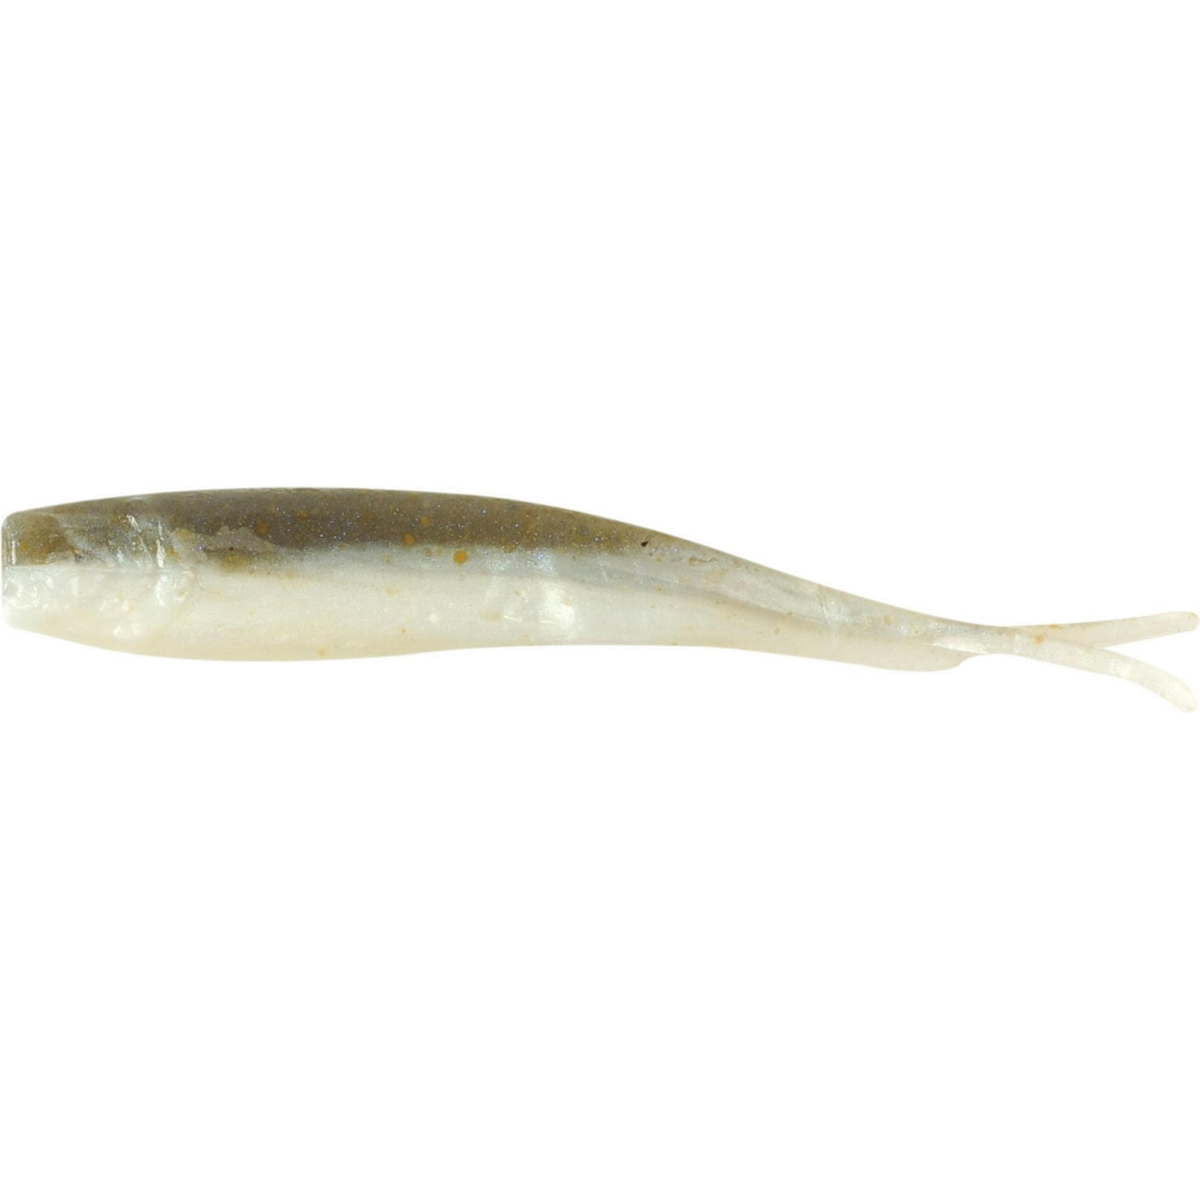 Photo of Berkley Gulp! Alive! Minnow  for sale at United Tackle Shops.